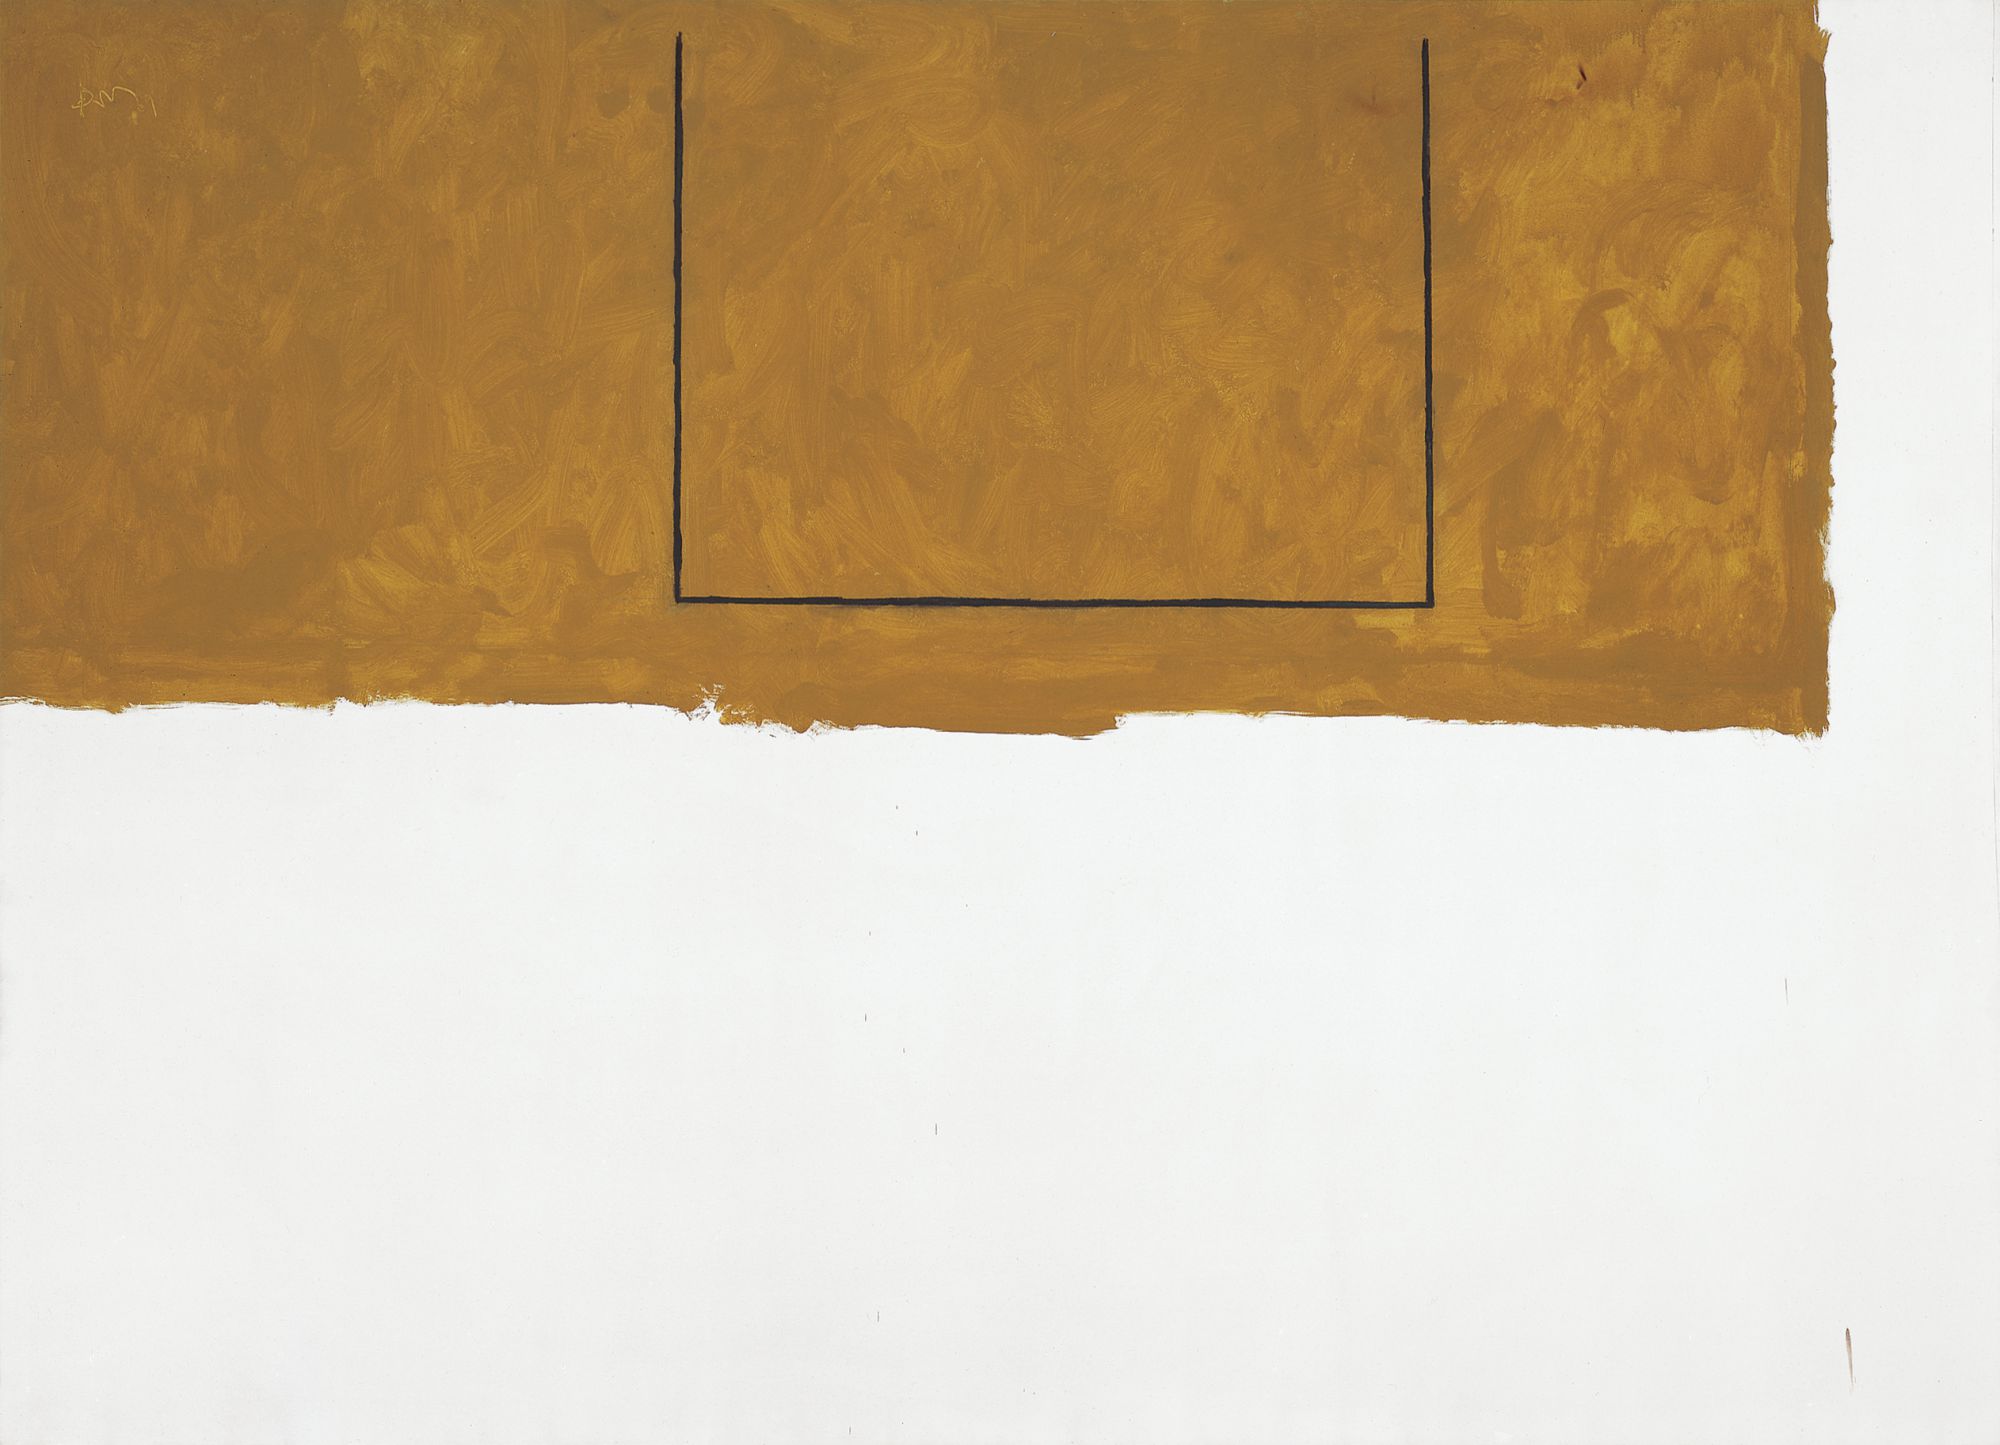 Open No. 111: Big White and Ochre, 1969, acrylic and charcoal on canvas, 93 ✕ 129 in. (236.2 ✕ 327.7 cm)